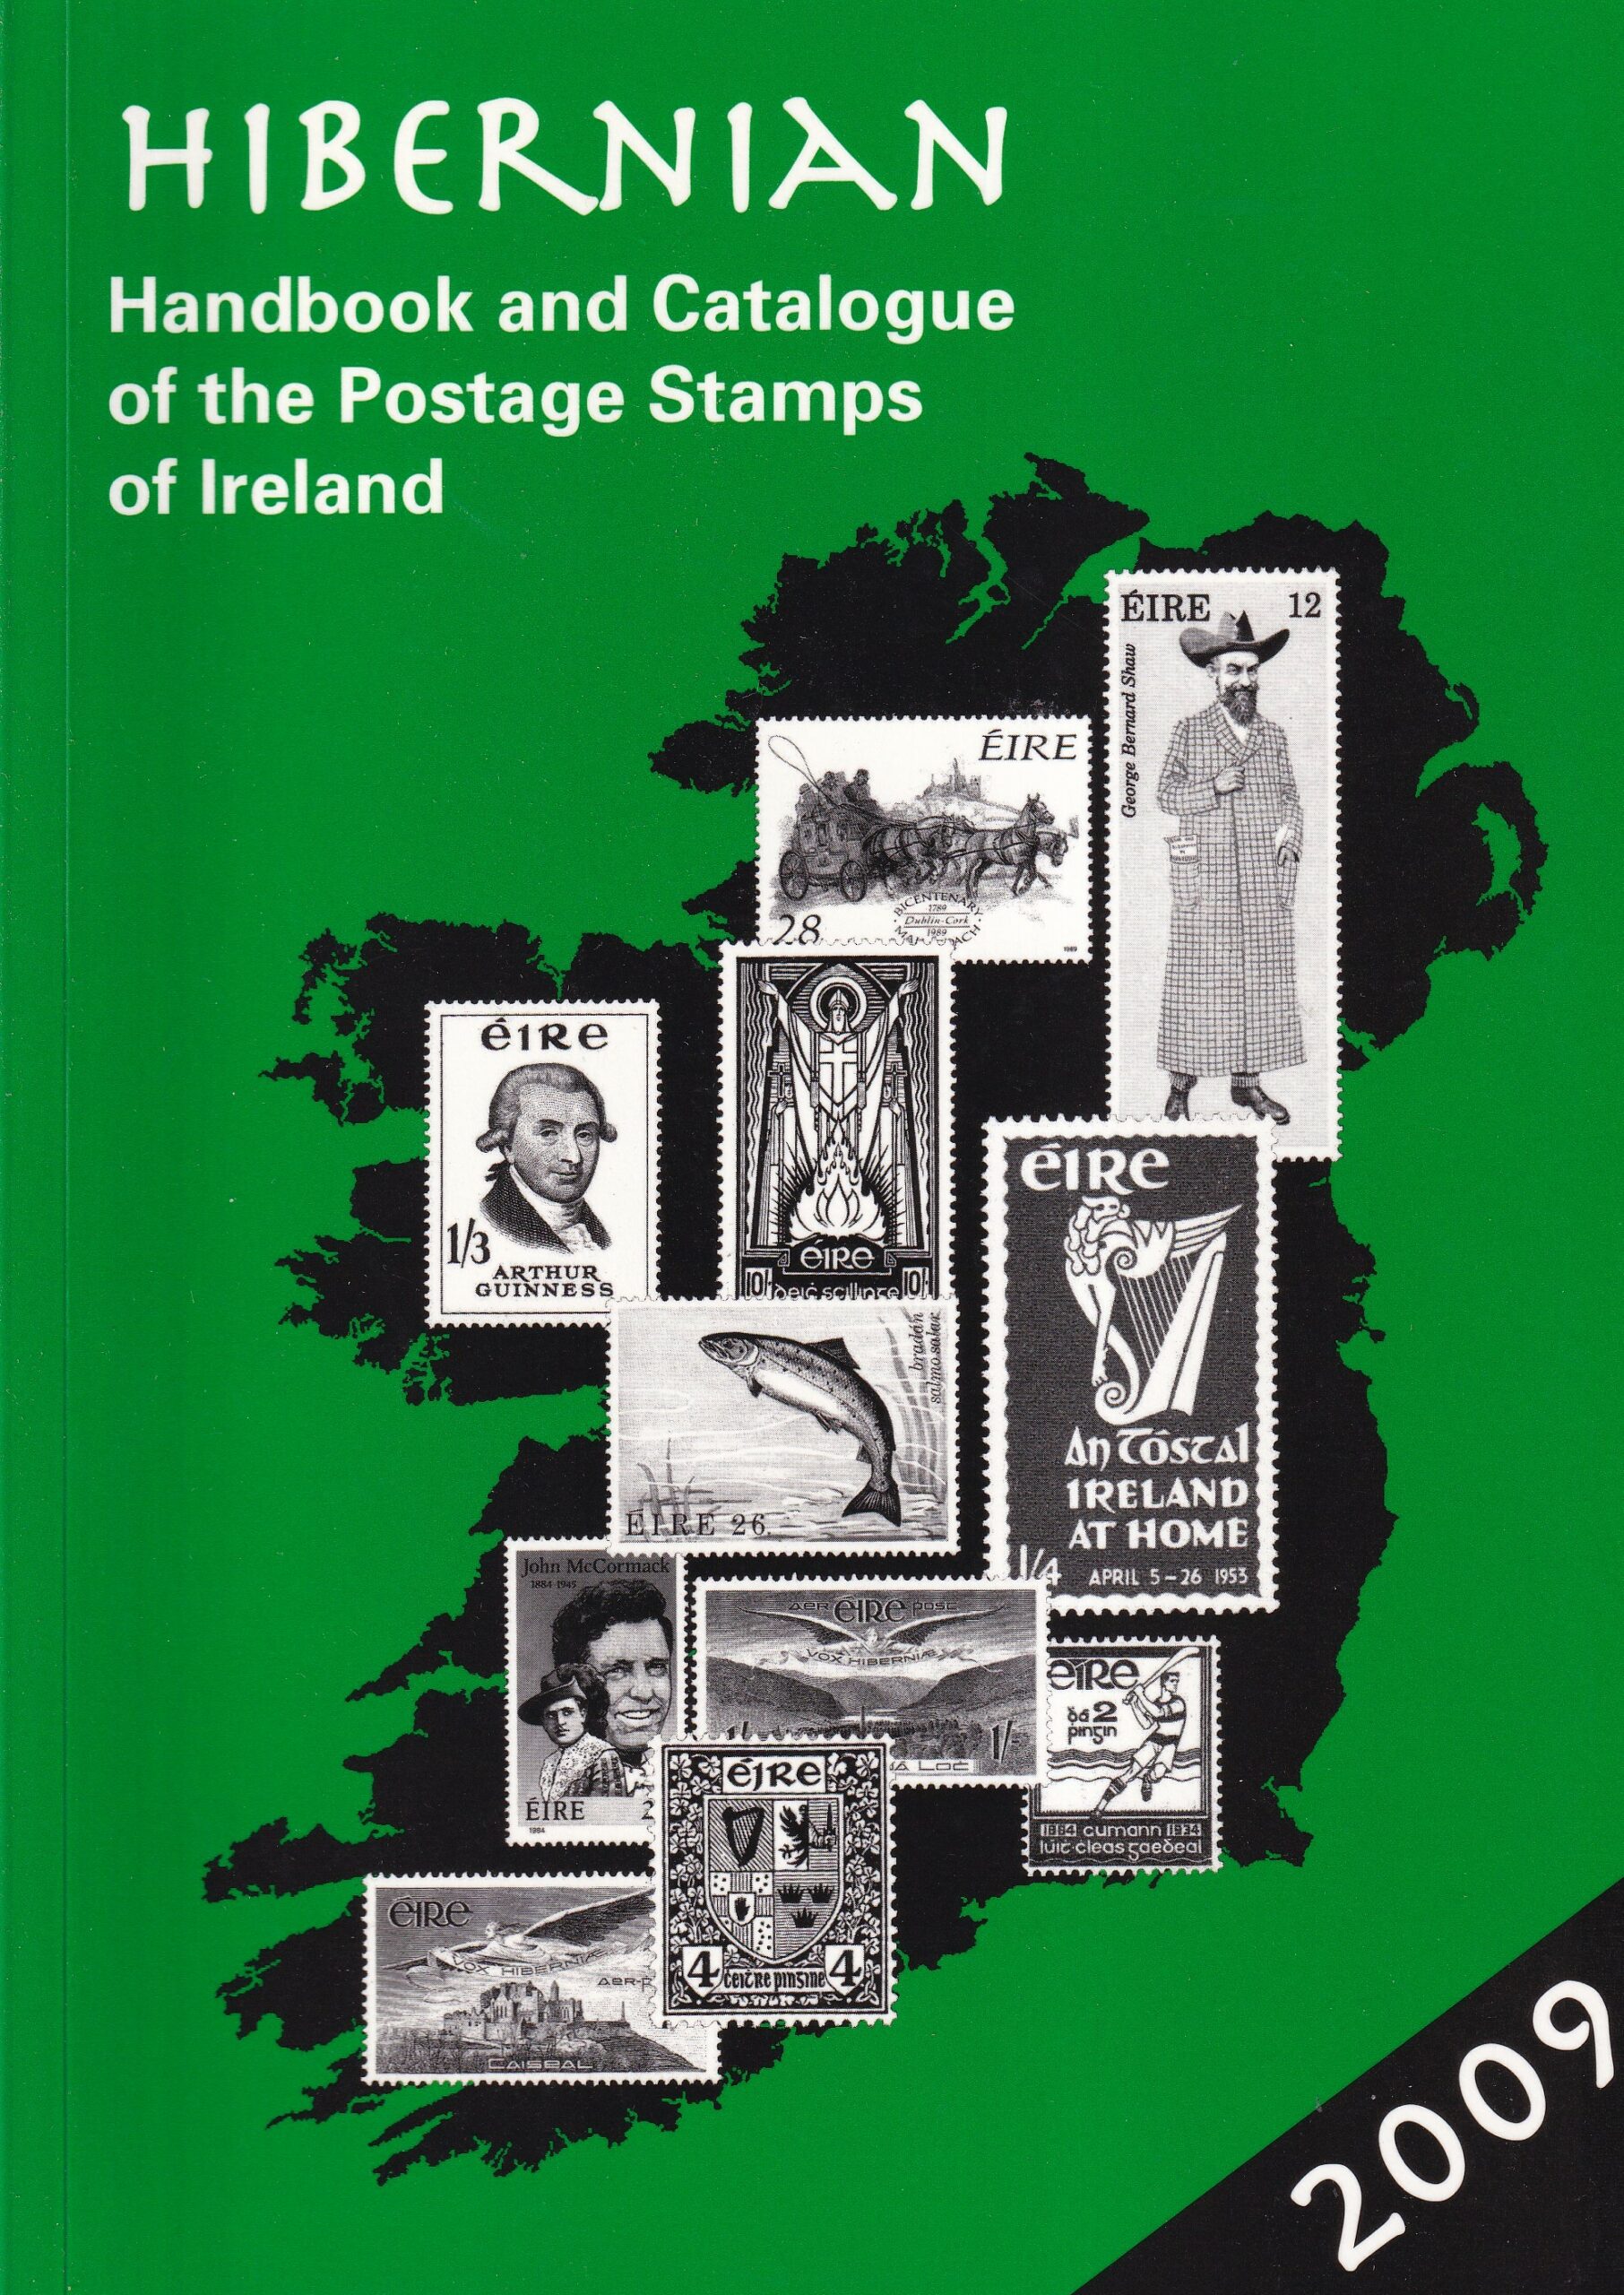 Hibernian: Handbook and Catalogue of the Postage Stamps of Ireland 2009 | Roy Hamilton-Bowen and Lee R. Wolverton (eds.) | Charlie Byrne's